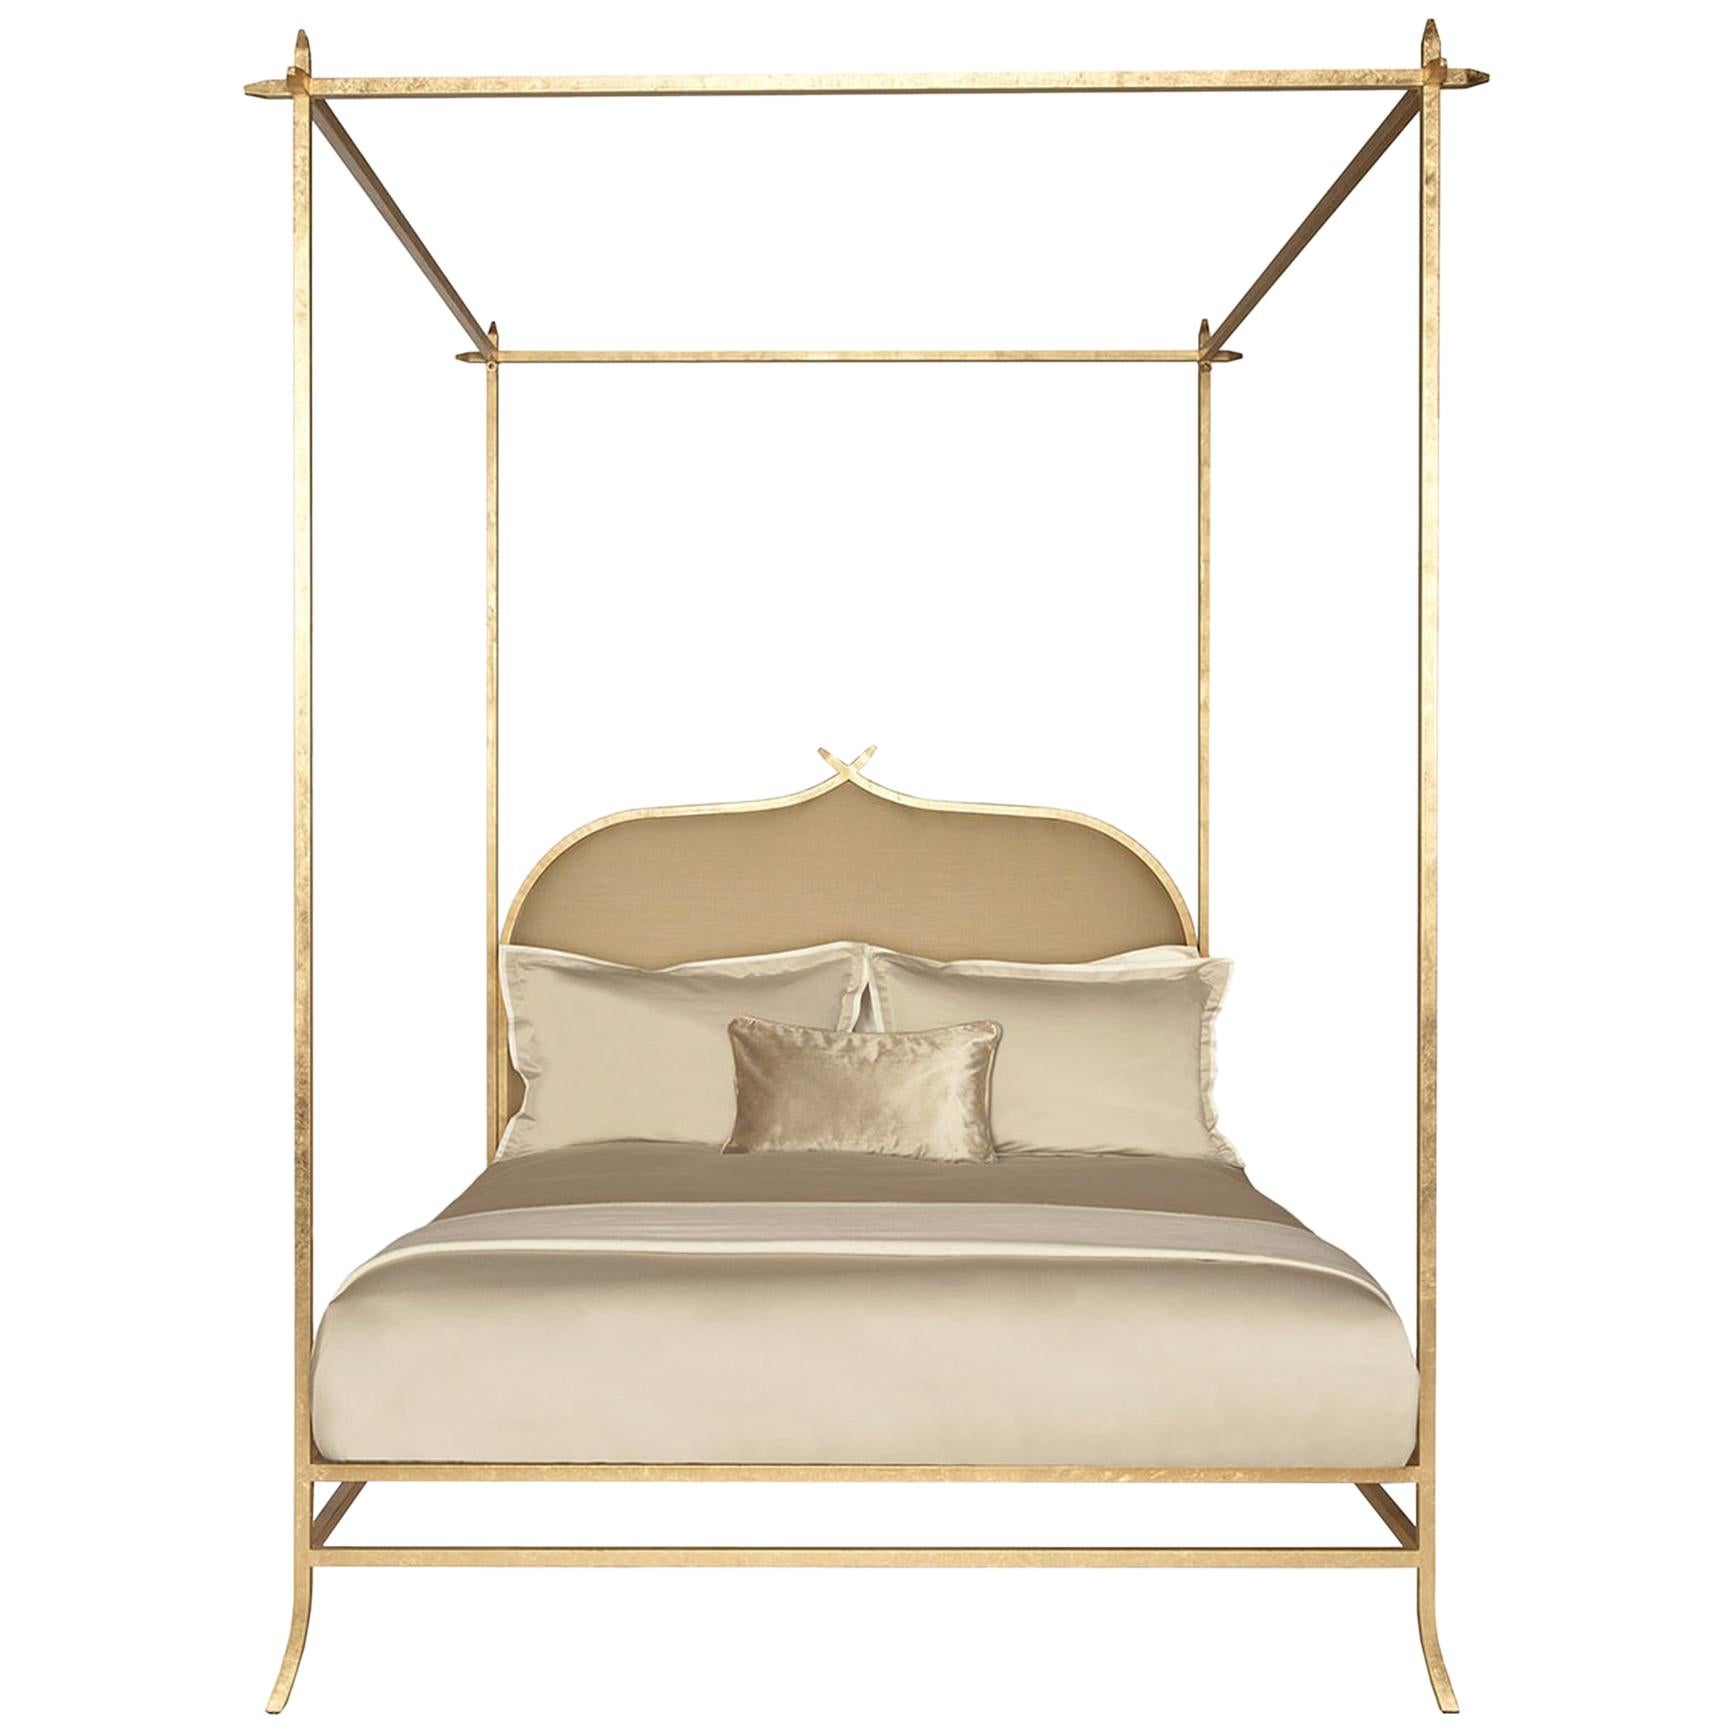 Casablanca Poster Queen Bed with Gold Leaf Frame by Innova Luxuxy Group For Sale